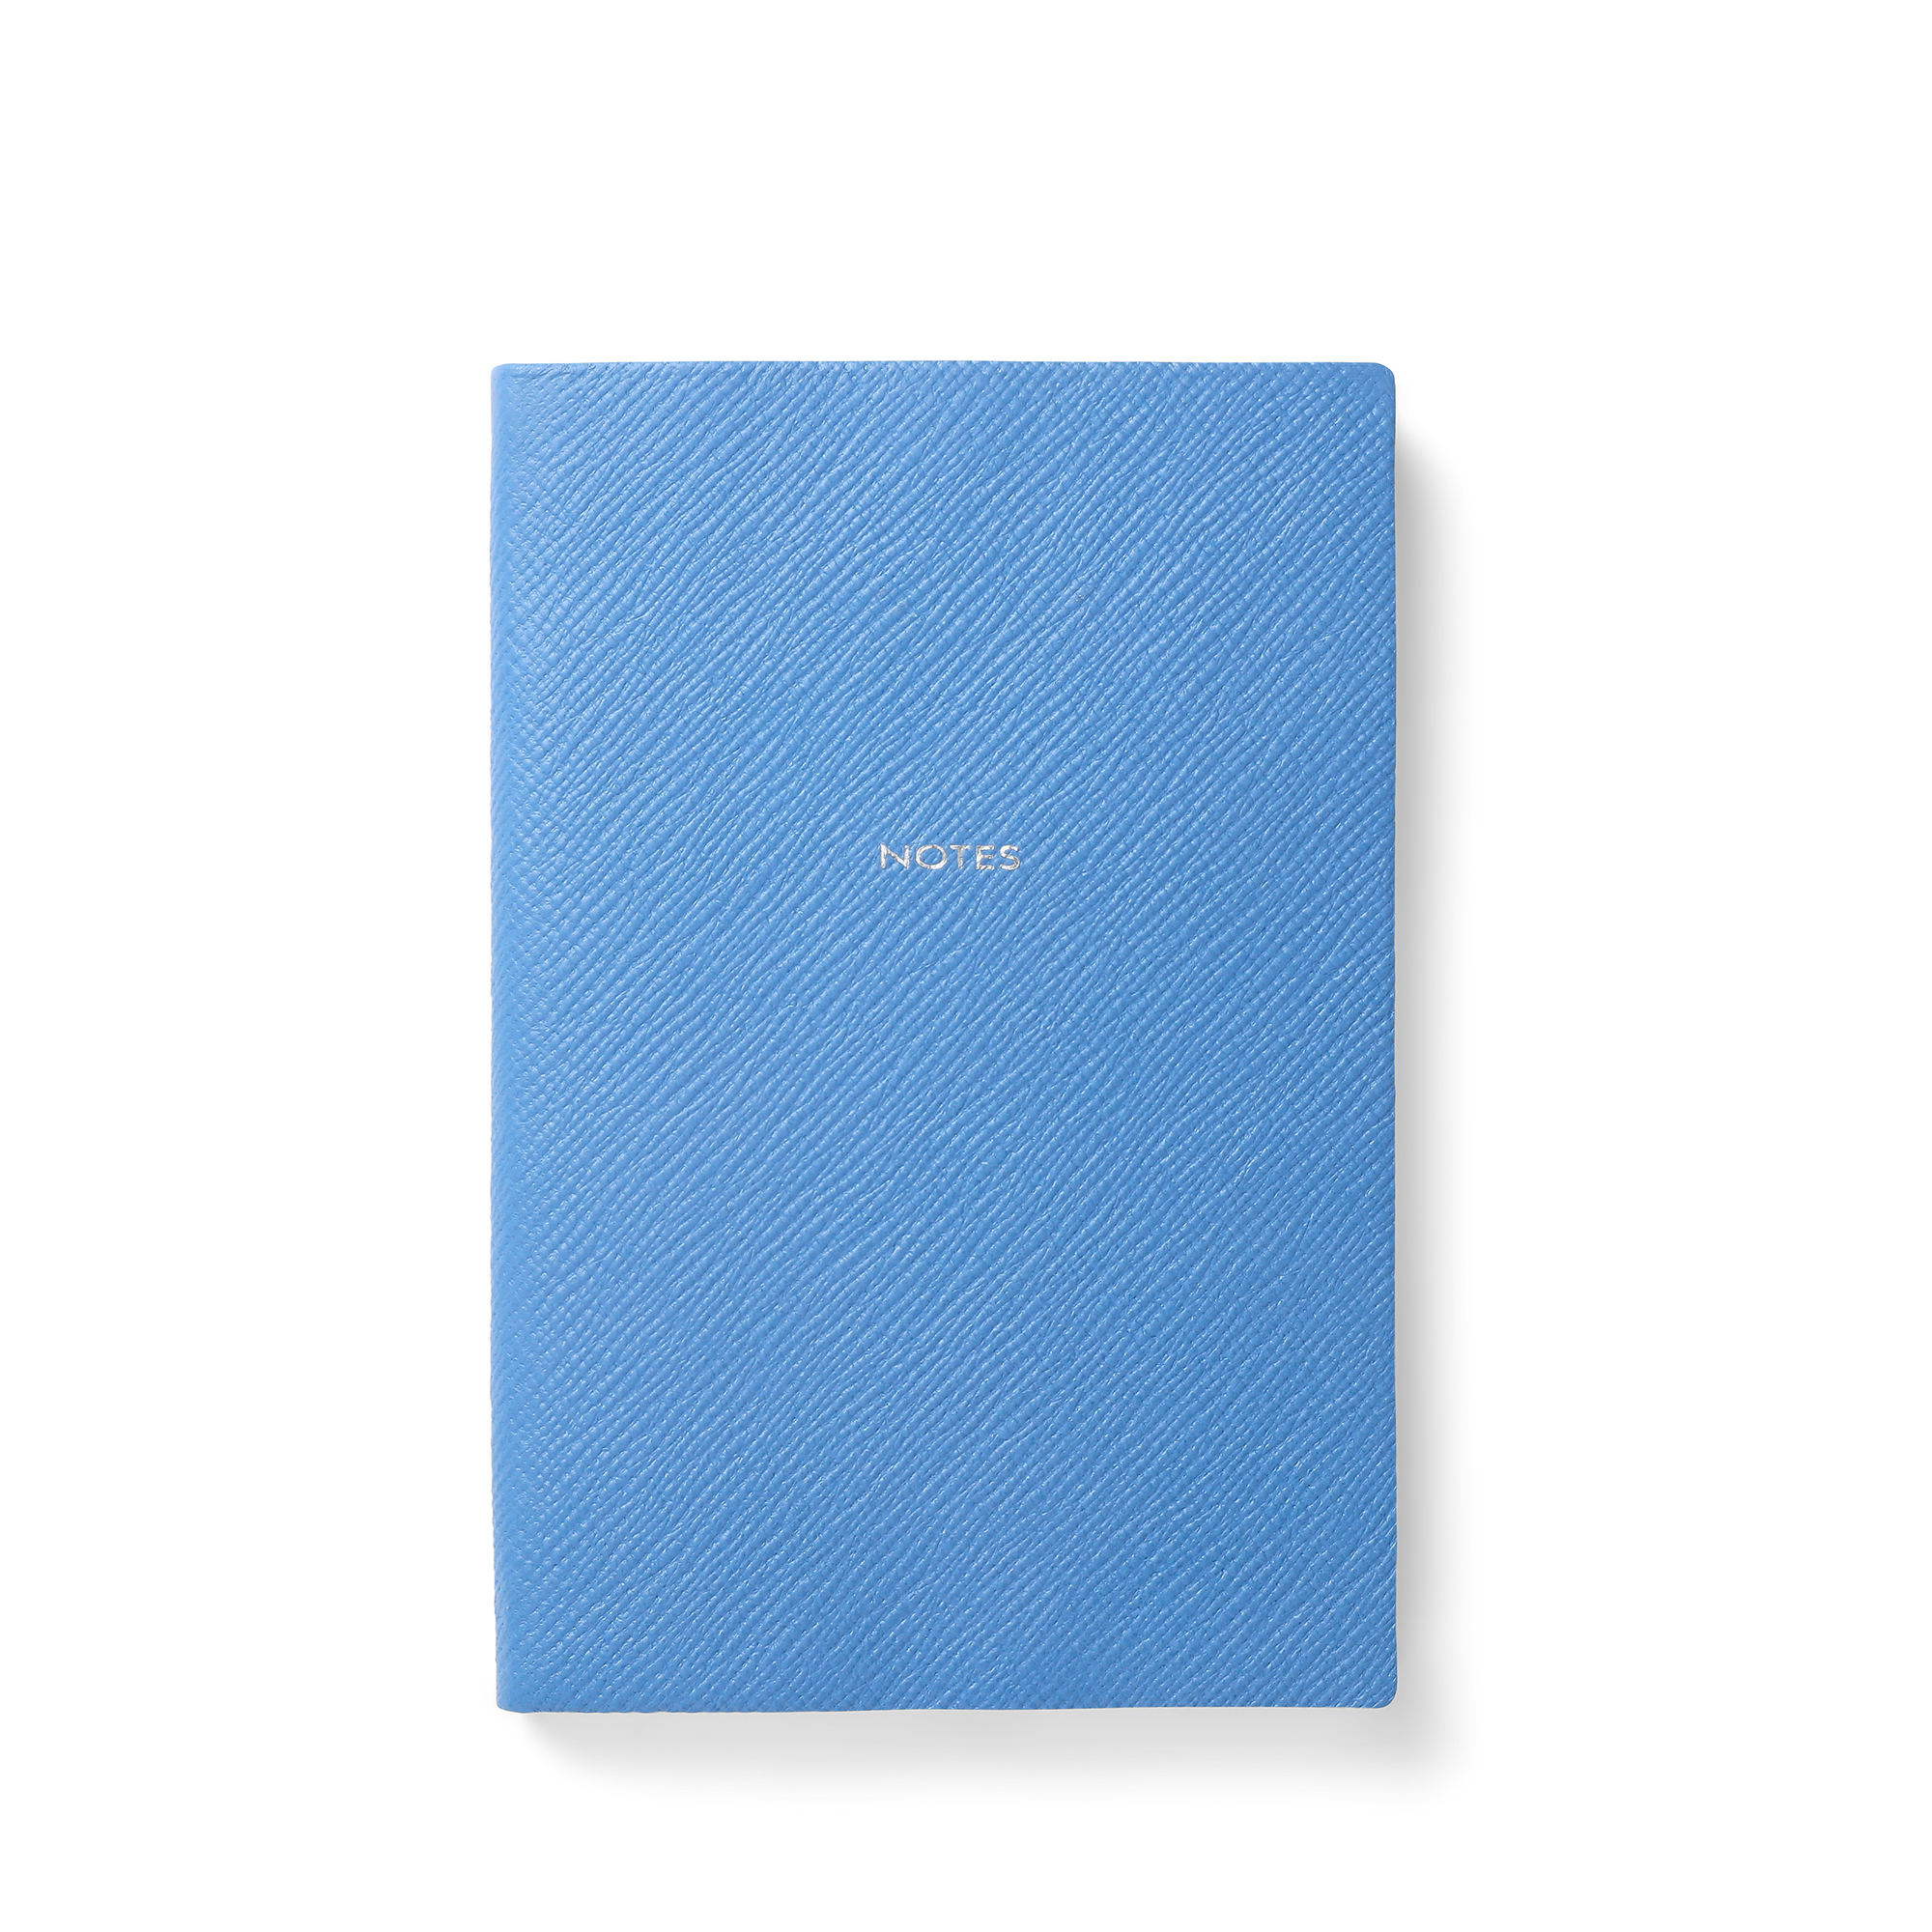 Notes Chelsea Notebook in Panama in nile blue